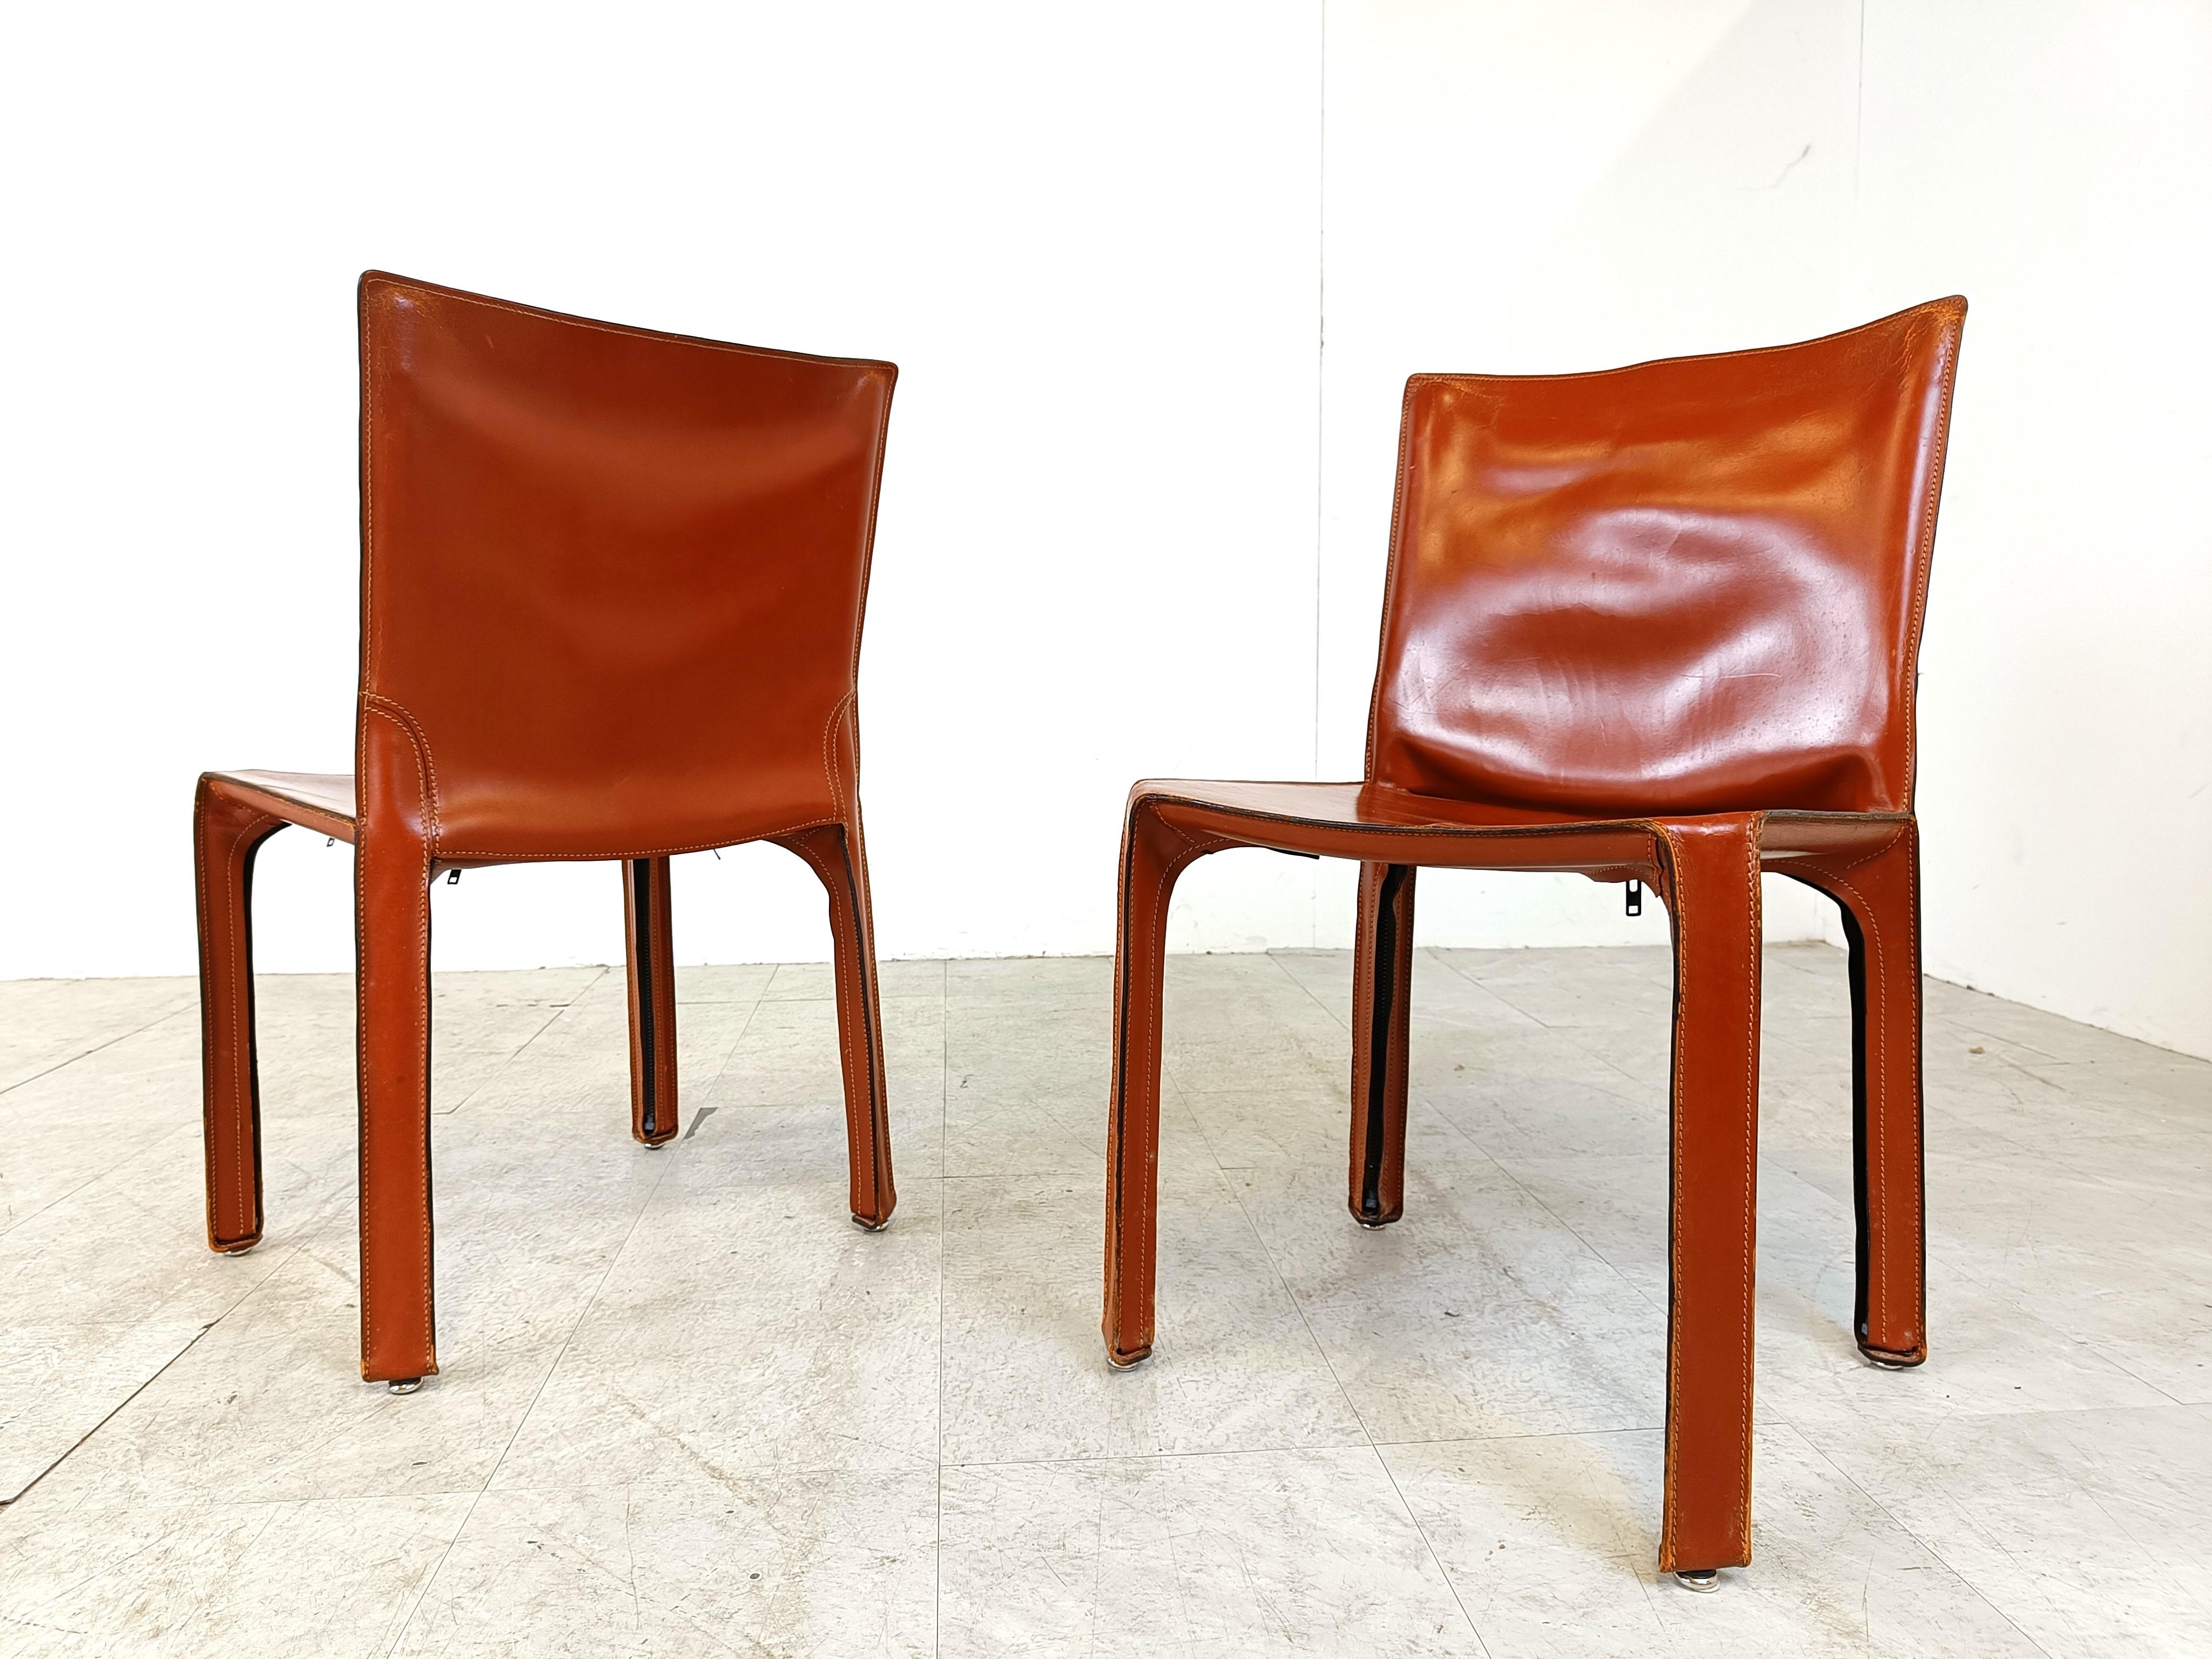 Set of 8 vintage red leather cab chairs designed by Mario Bellini for Cassina

1970s - Italy

Good condition with normal age related wear

The chairs original labels are gone but there are still spots from where they use to hang, we can confirm